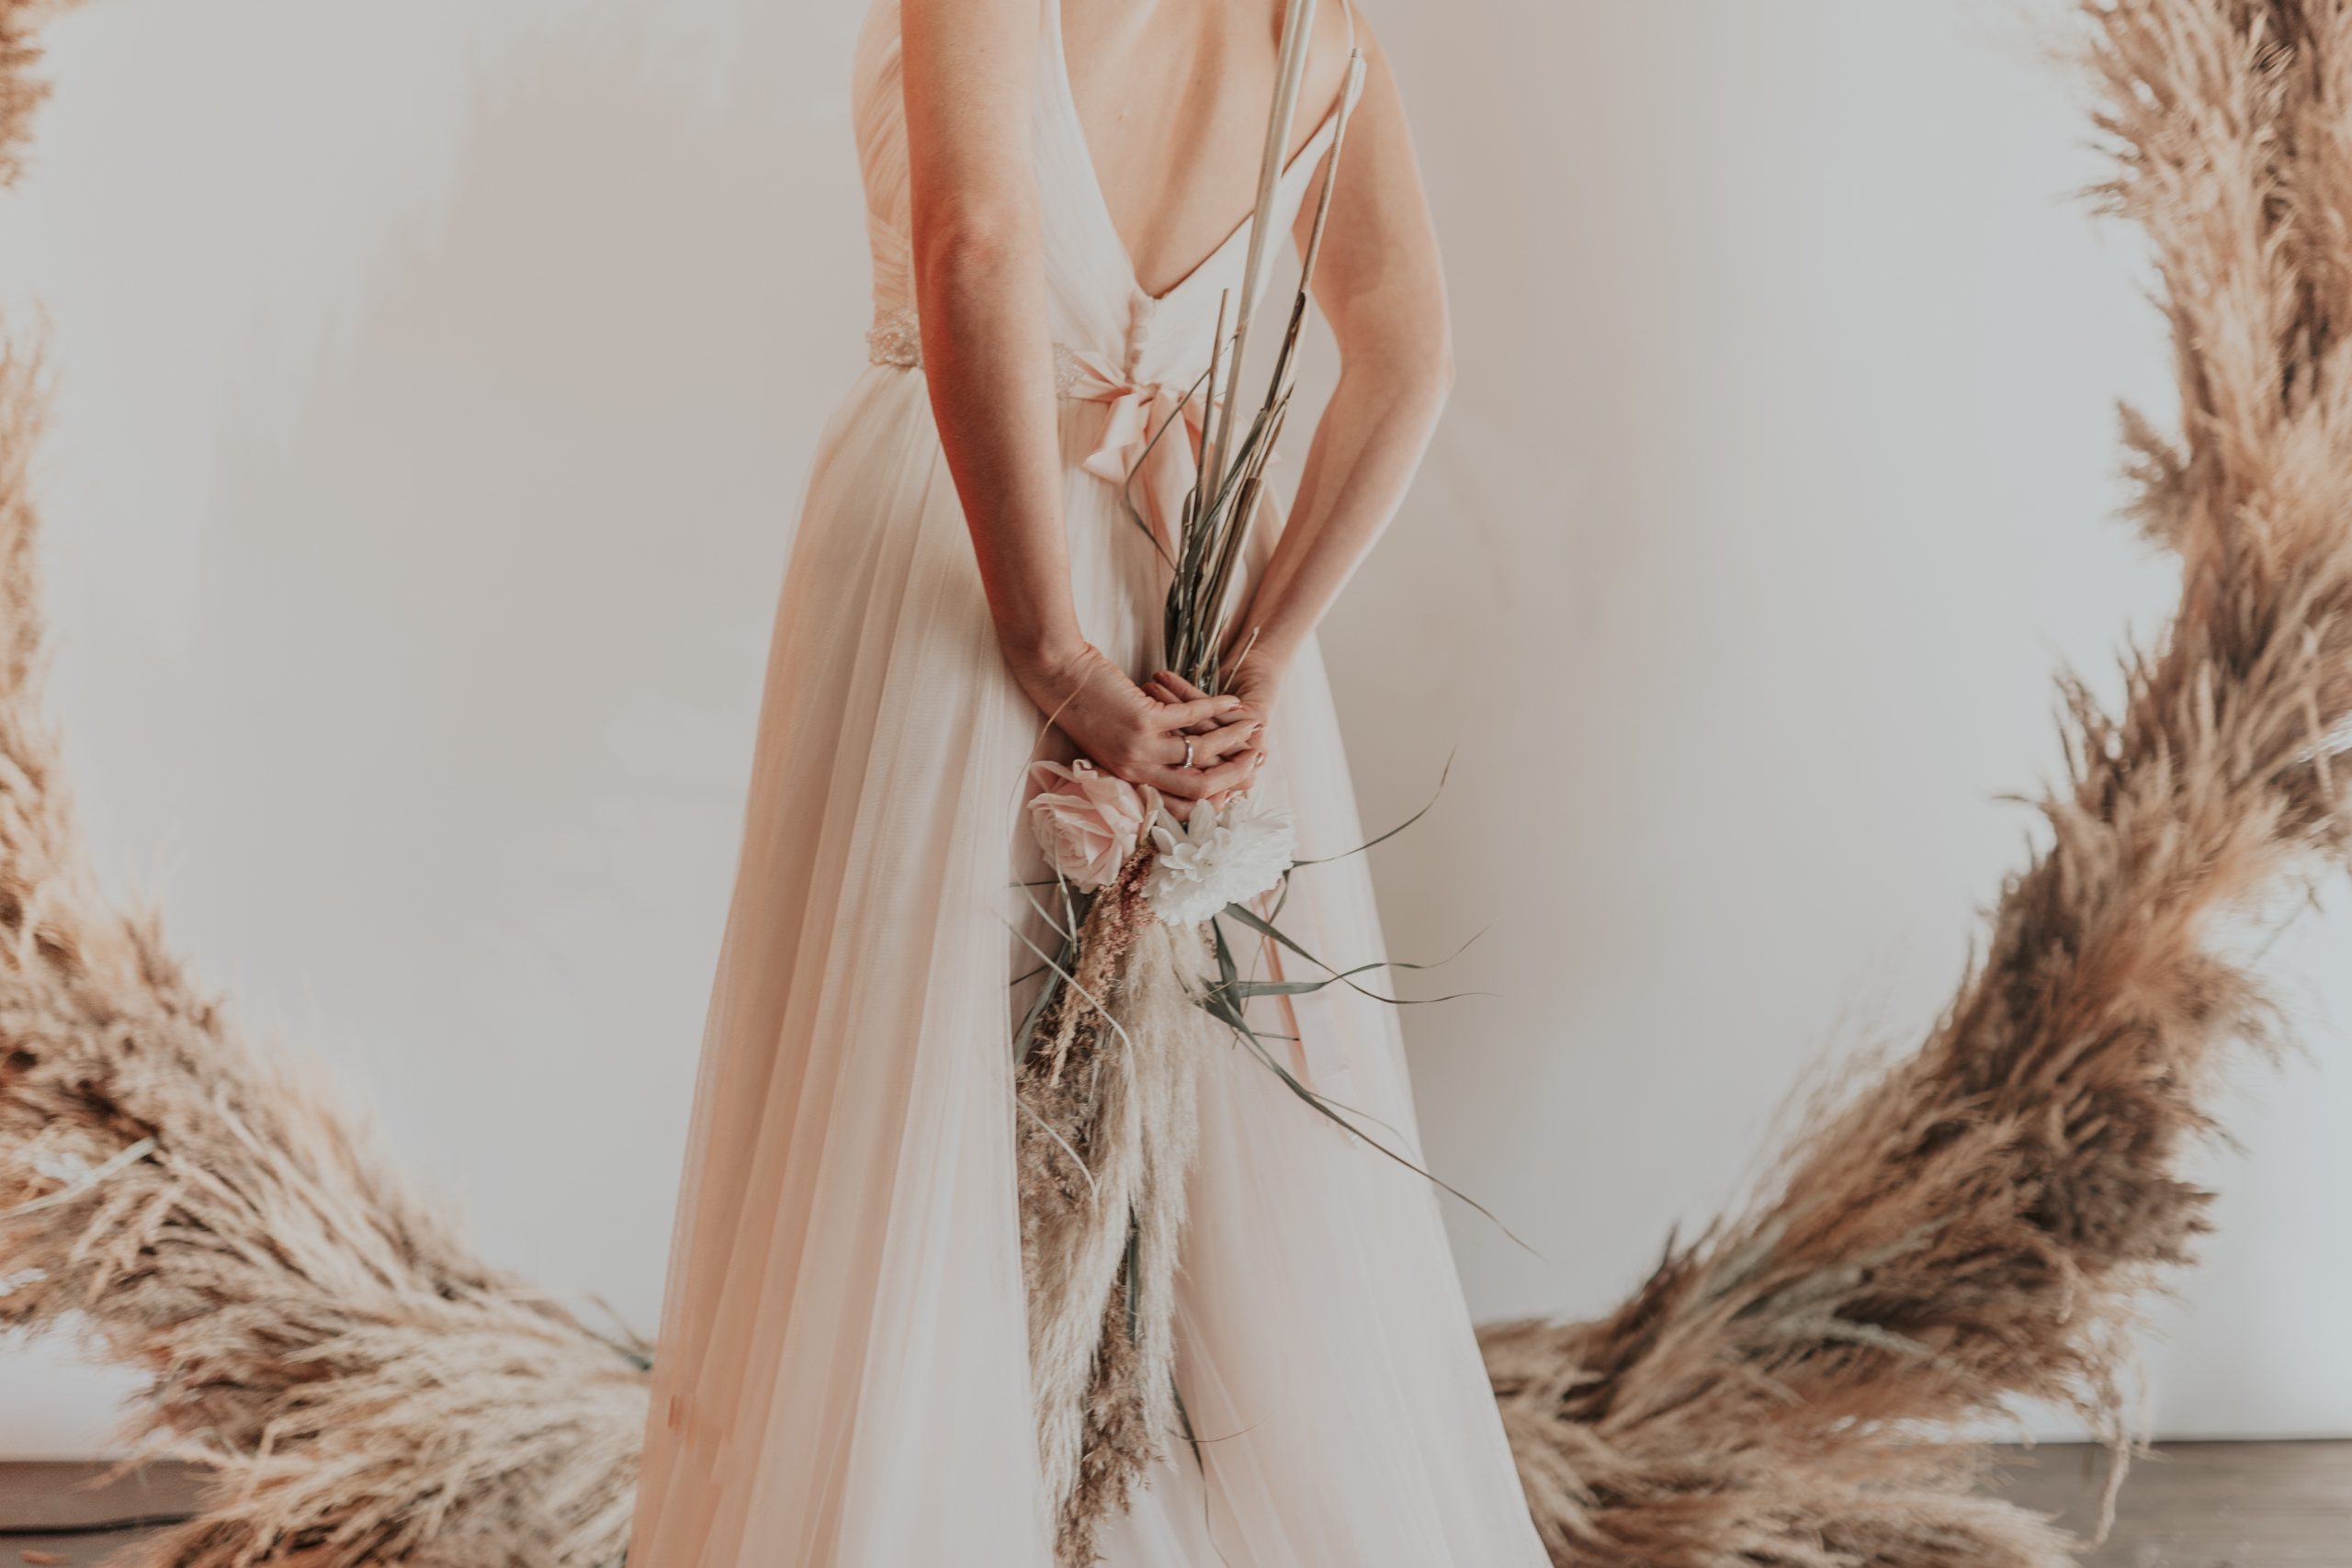 1648956521 100 Pampas grass trend In love with nature wedding blog - Pampas grass trend: In love with nature